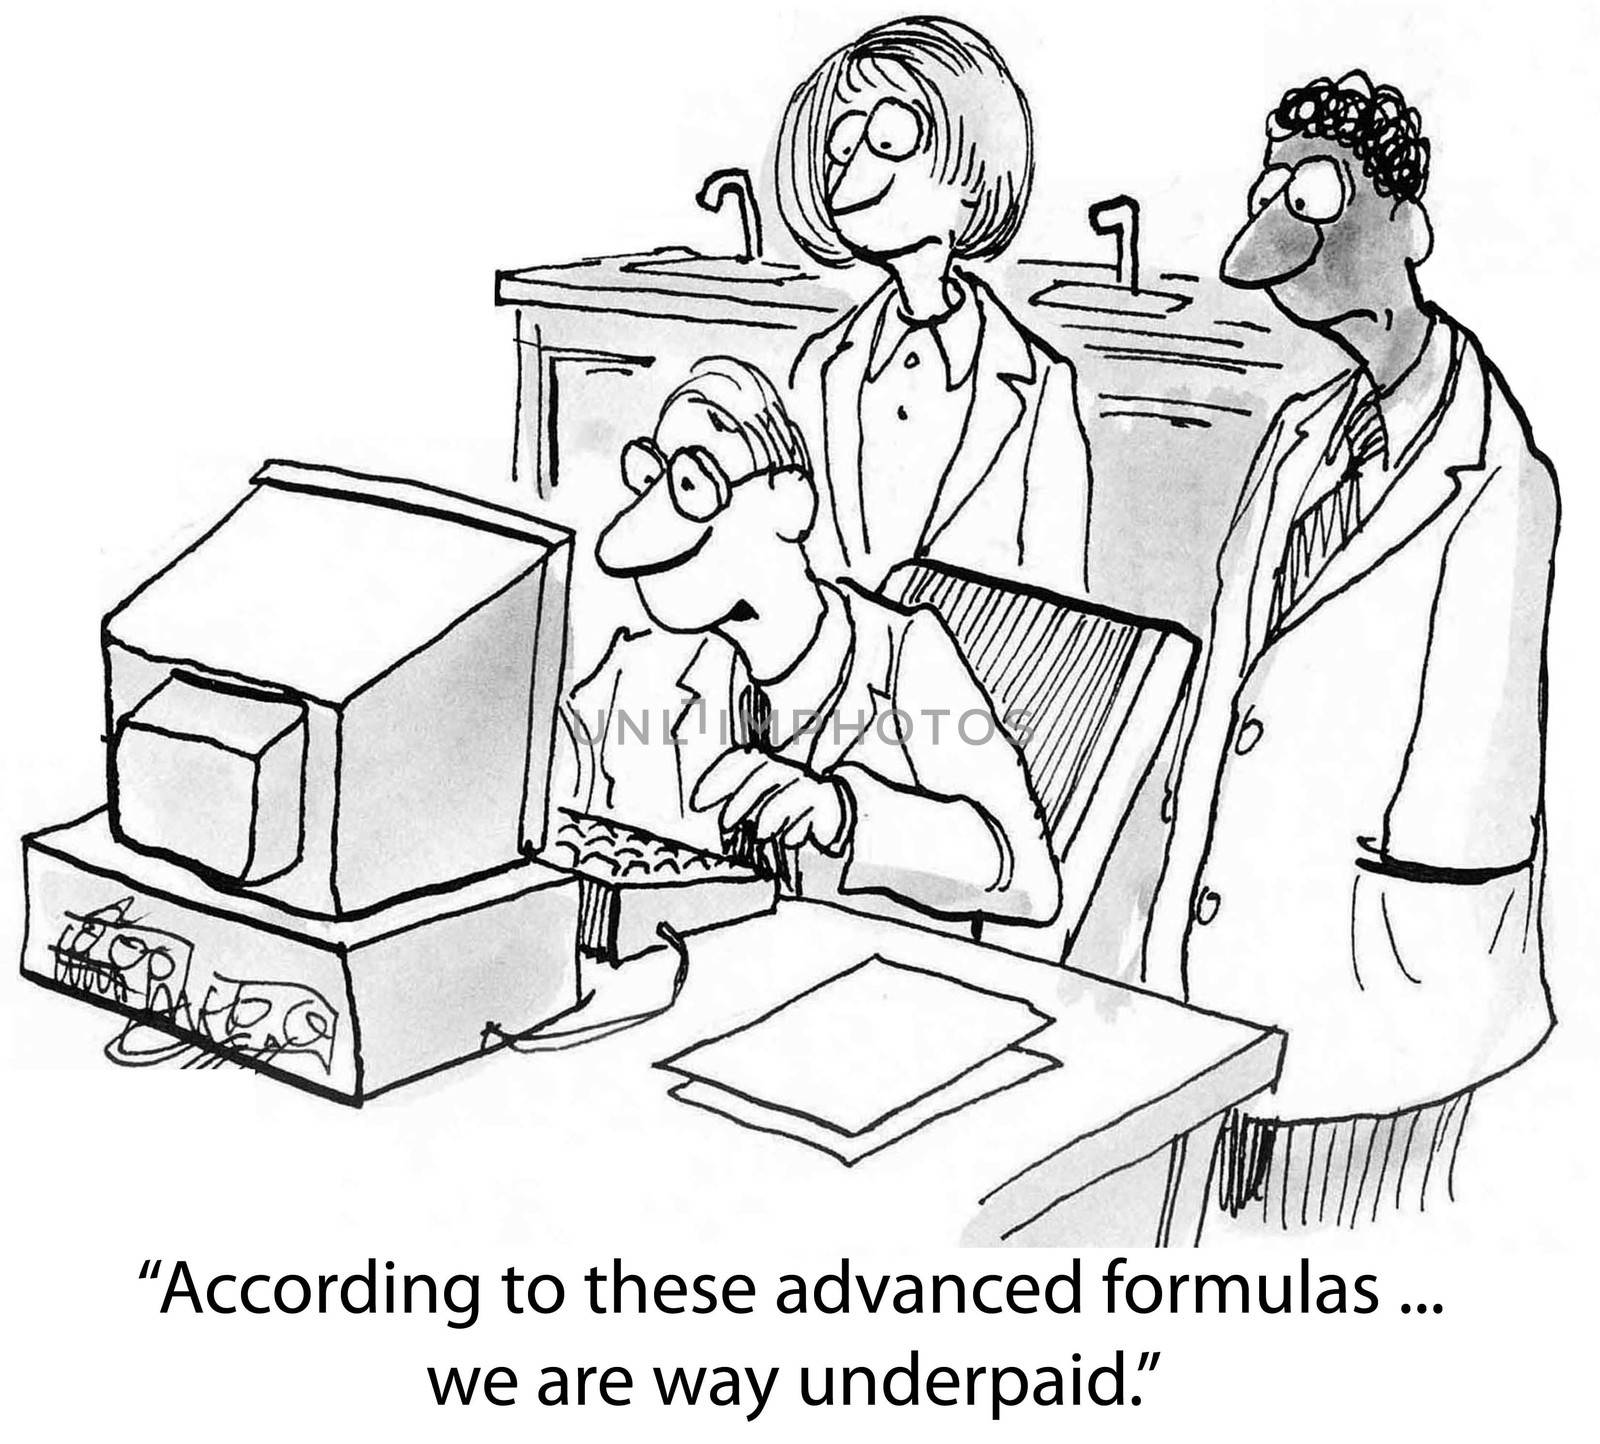 "According to these advanced formulas ... we are way underpaid.